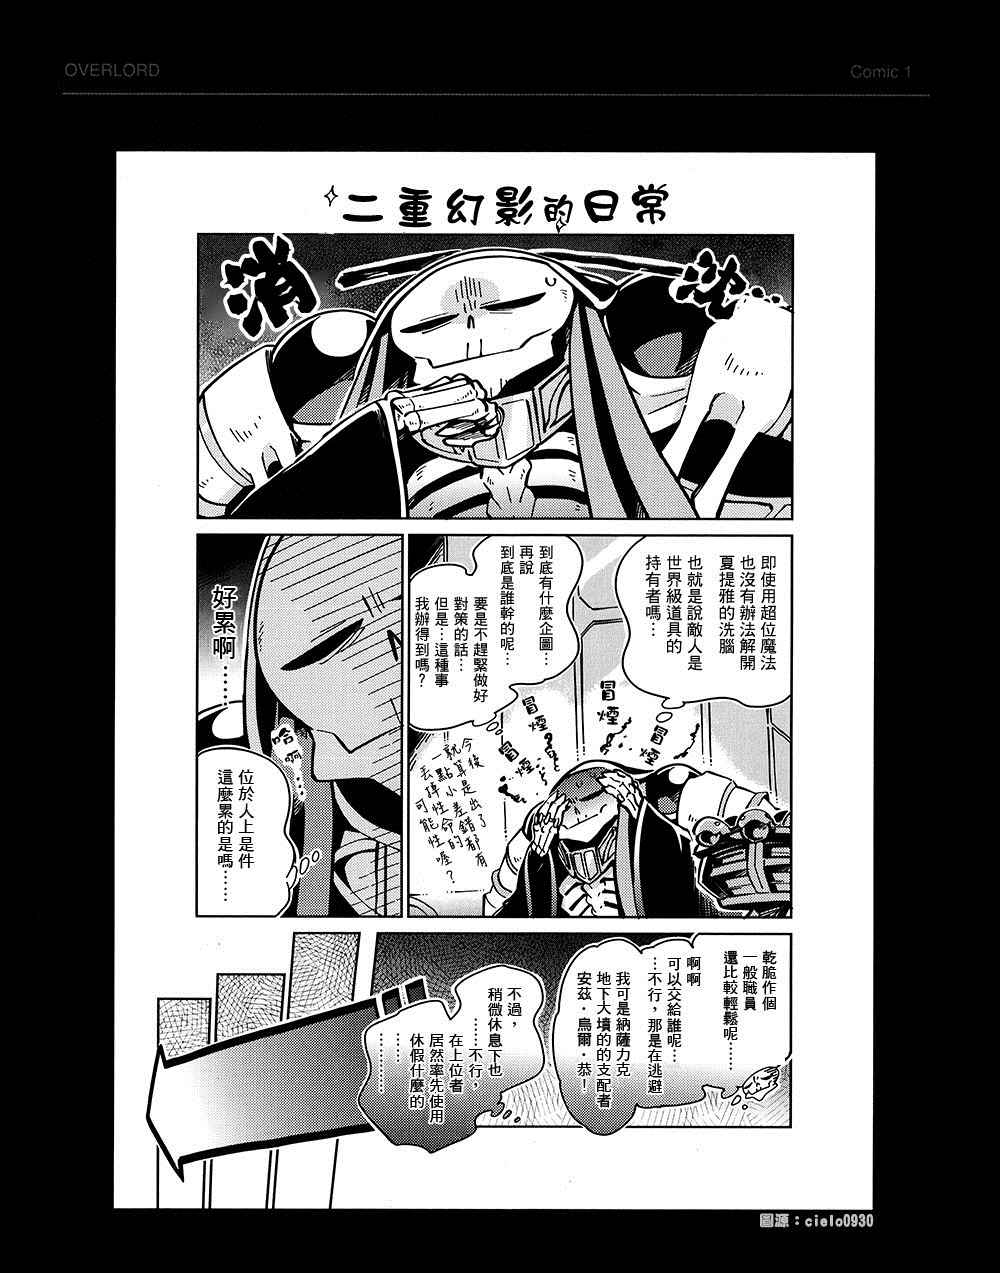 《OVERLORD》漫画 BD附录05